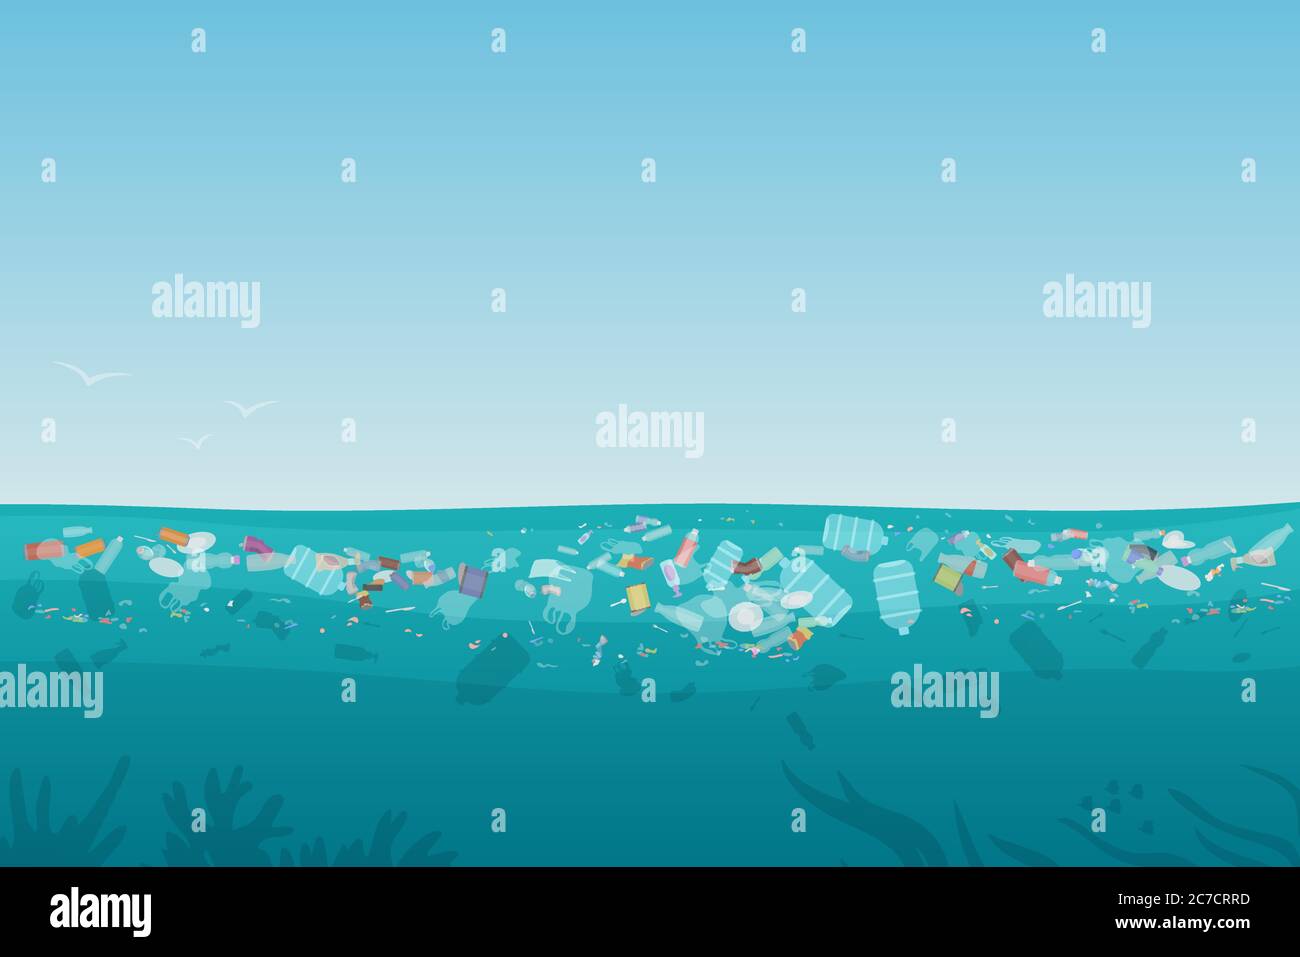 Plastic pollution trash on sea surface with different kinds of garbage - plastic bottles, bags, wastes floating in water. Sea ocean water pollution background concept vector illustration Stock Vector